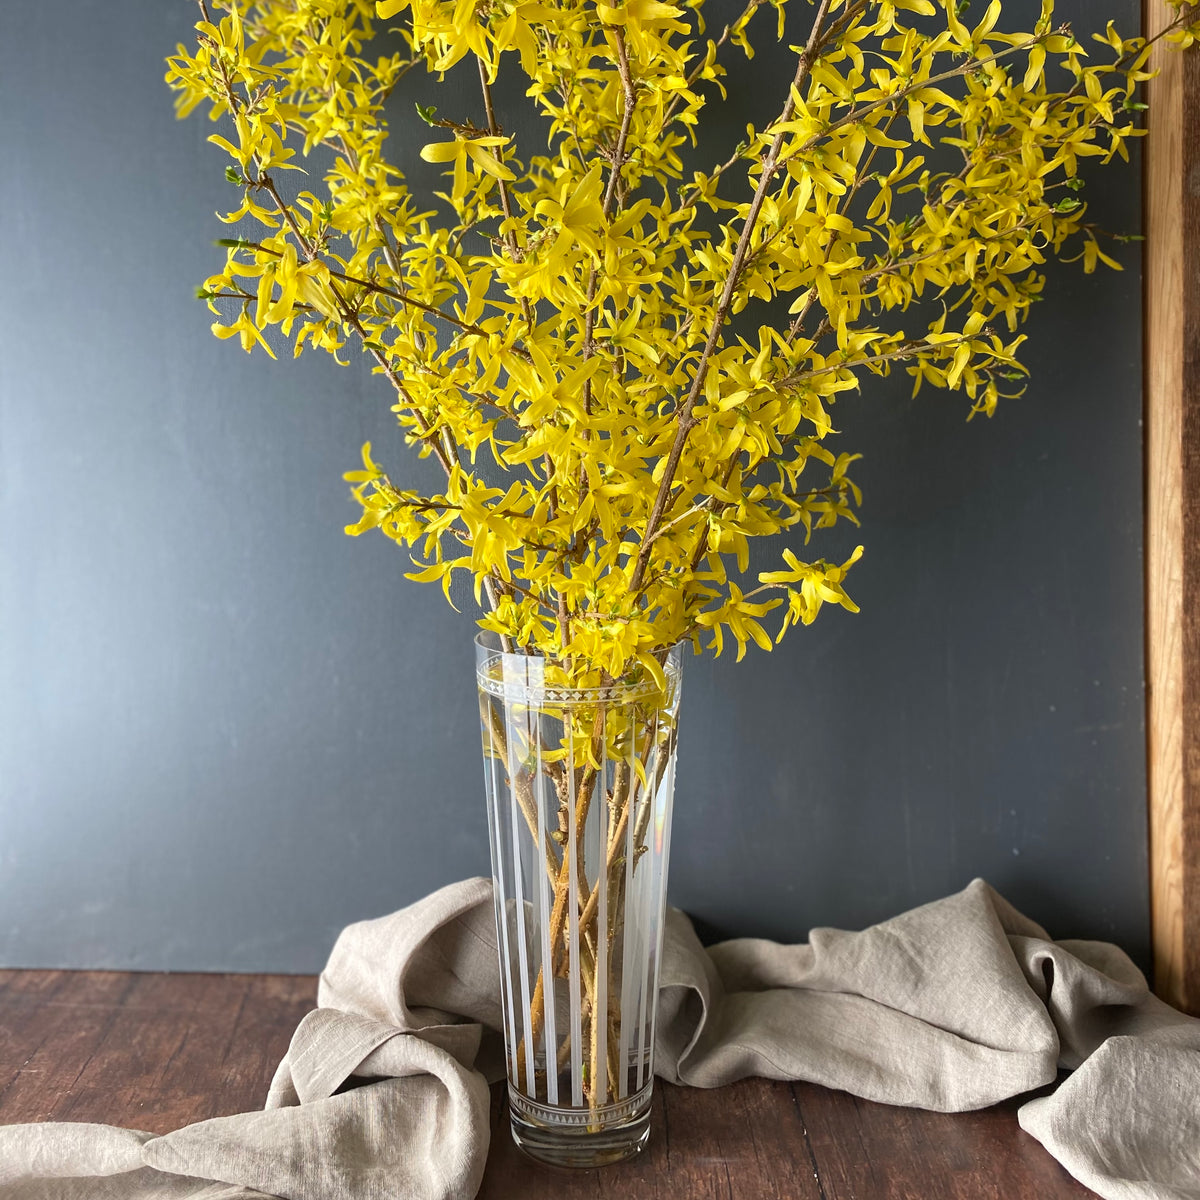 Forsythia flowers in a Caskata Marrakech Glass Vase on a wooden table with Marrakech-inspired graphic patterns.